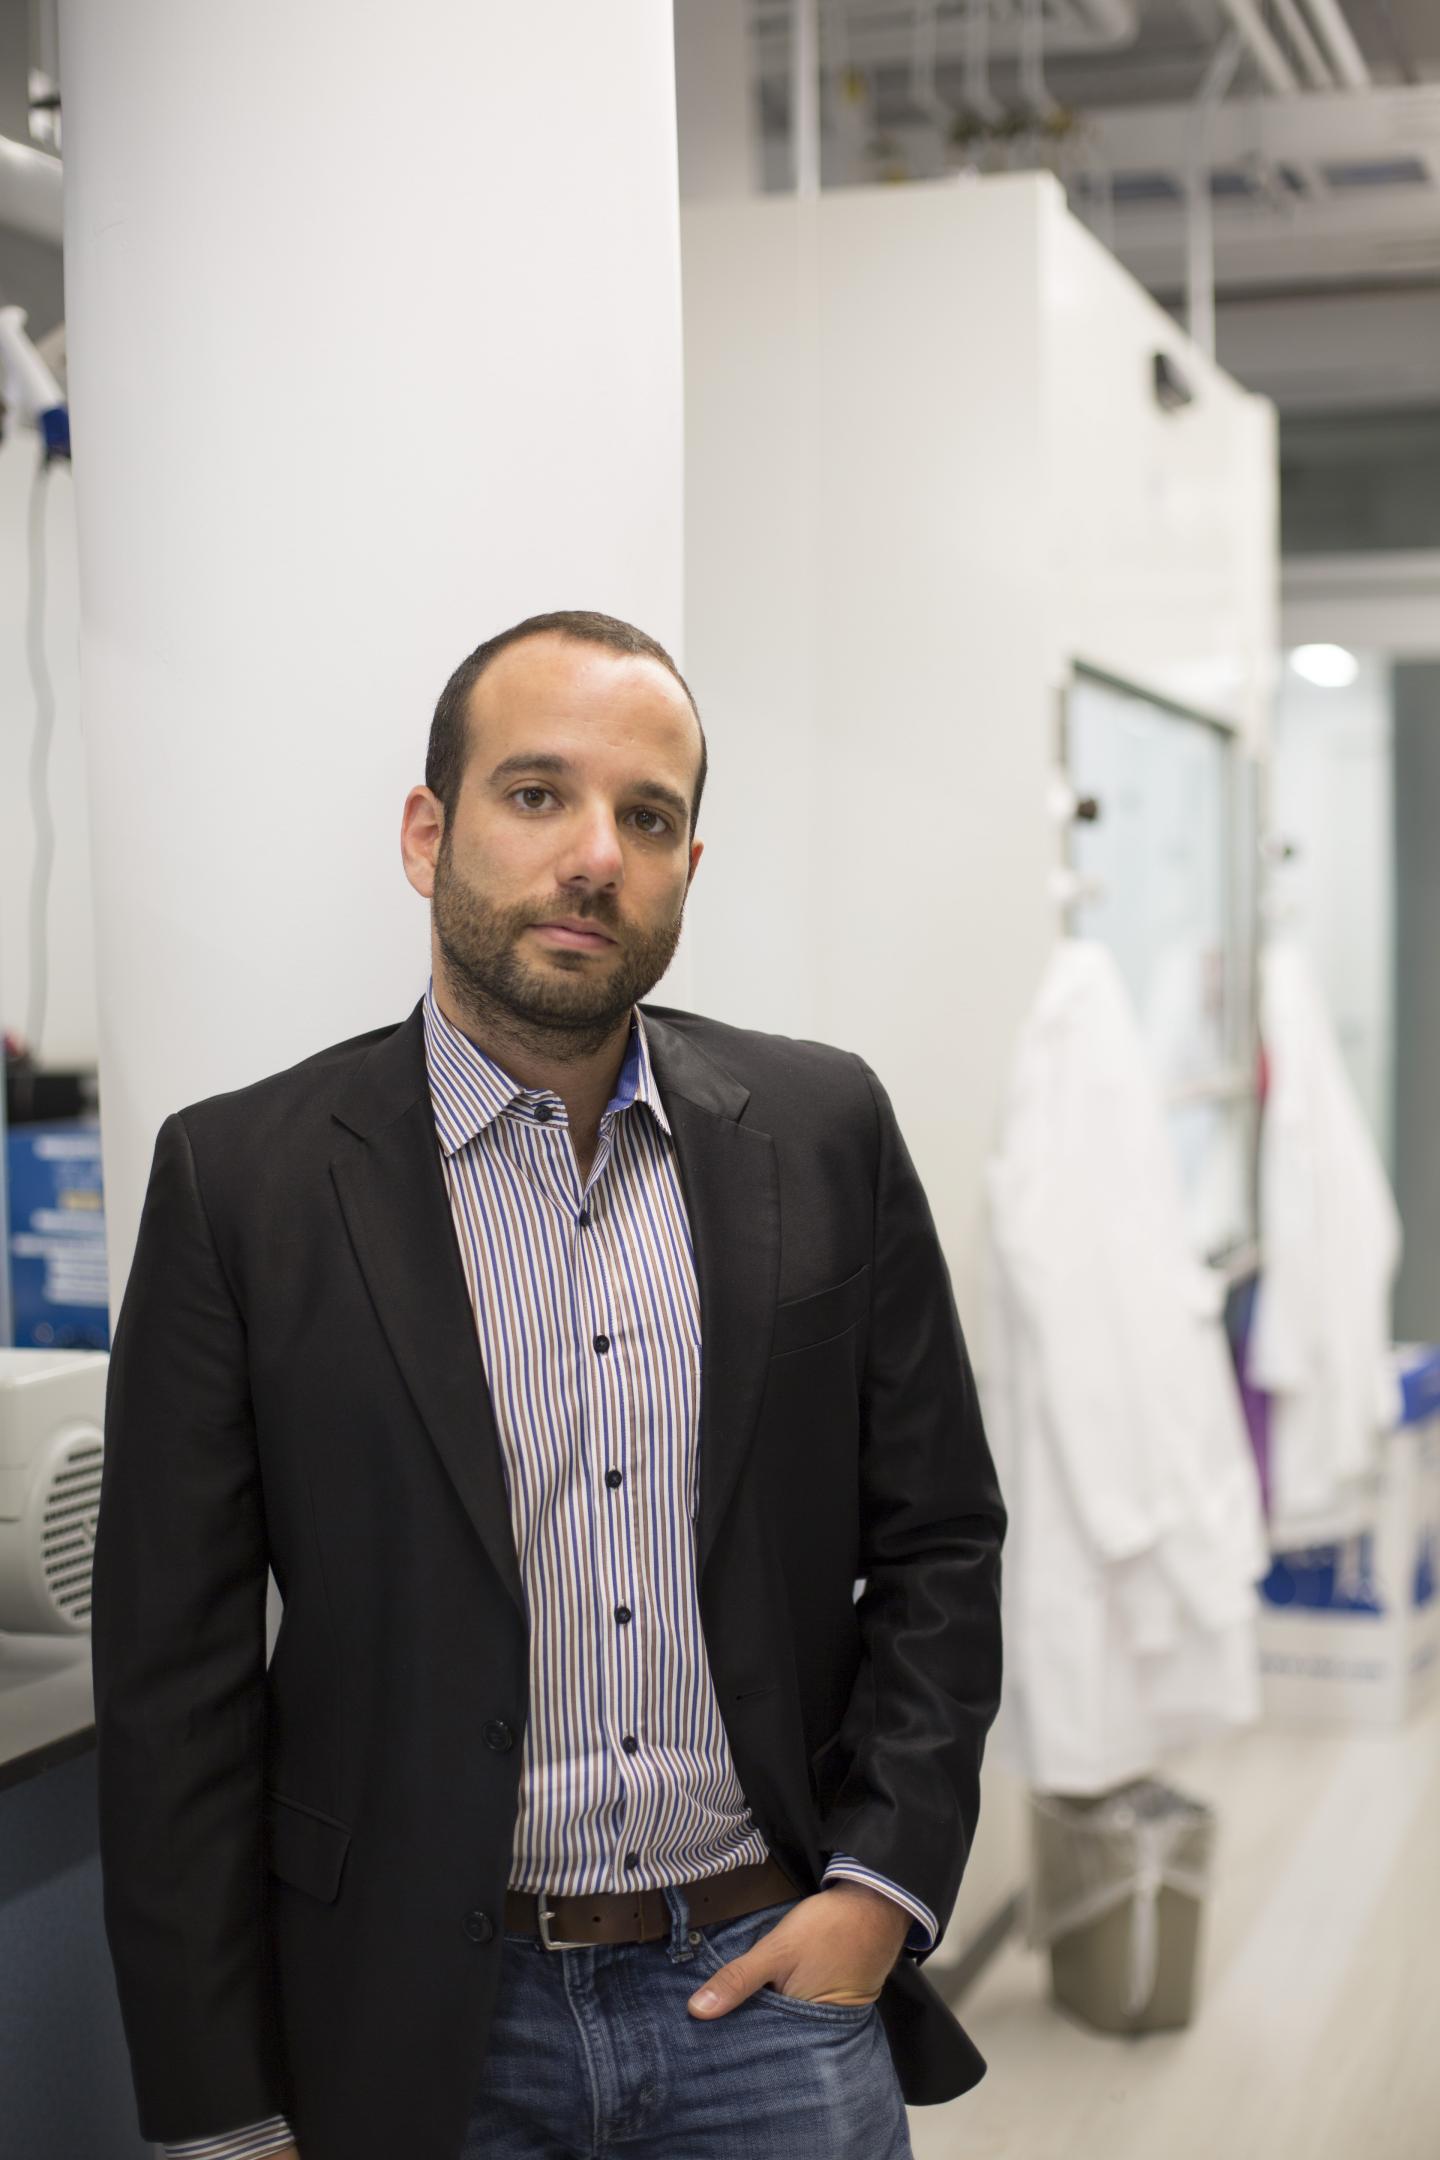 Miguel Modestino, Assistant Professor of Chemical and Biomolecular Engineering at NYU Tandon